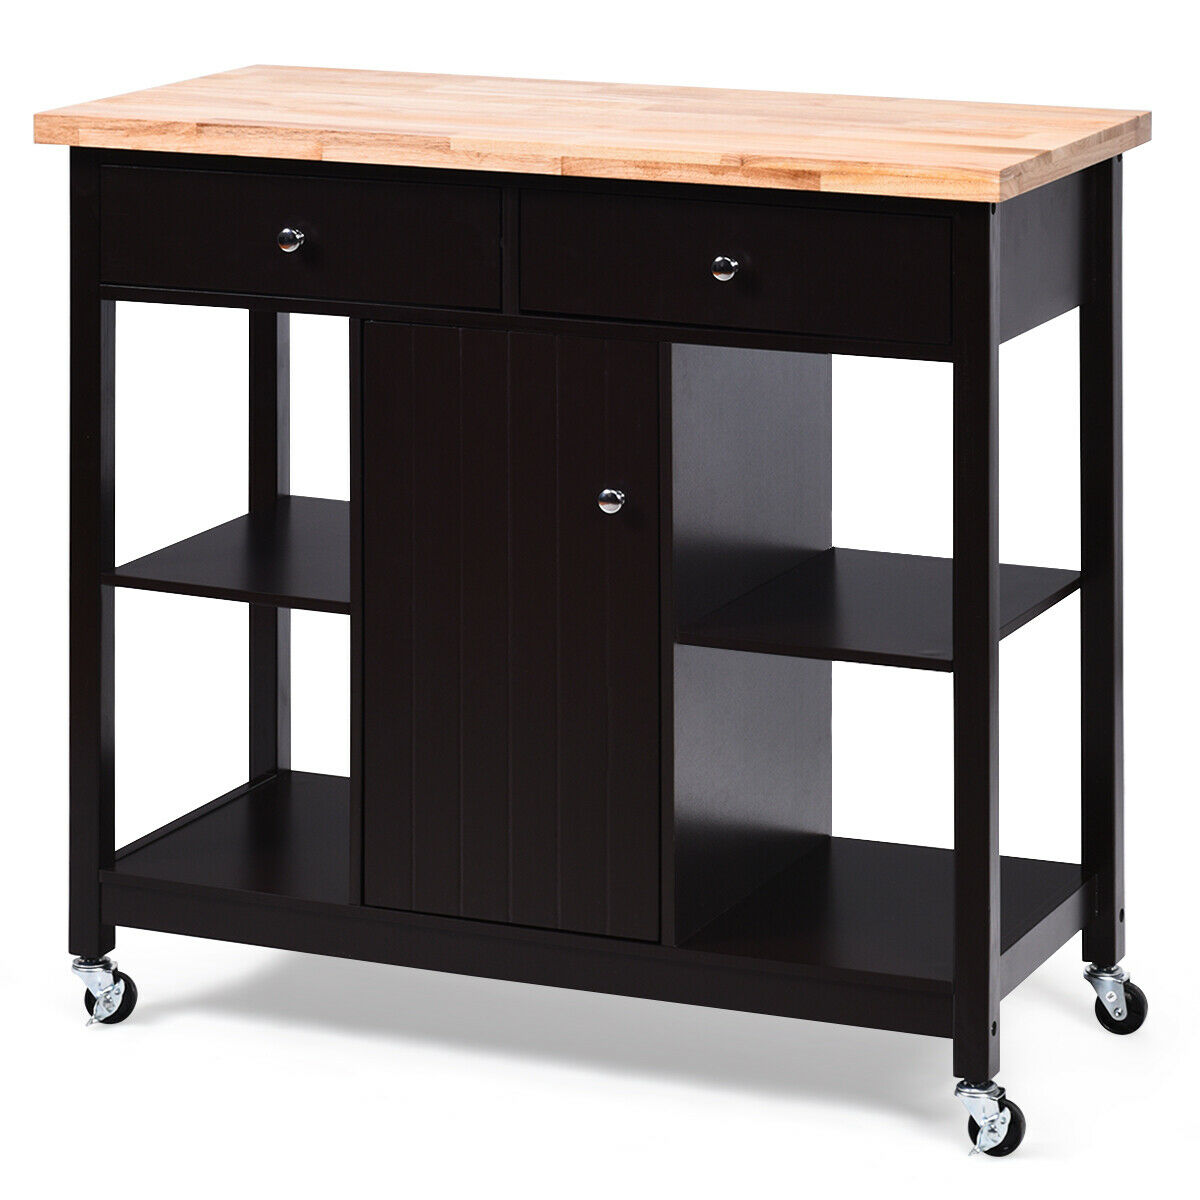 Kitchen Island Trolley with Drawers and Shelves-Brown